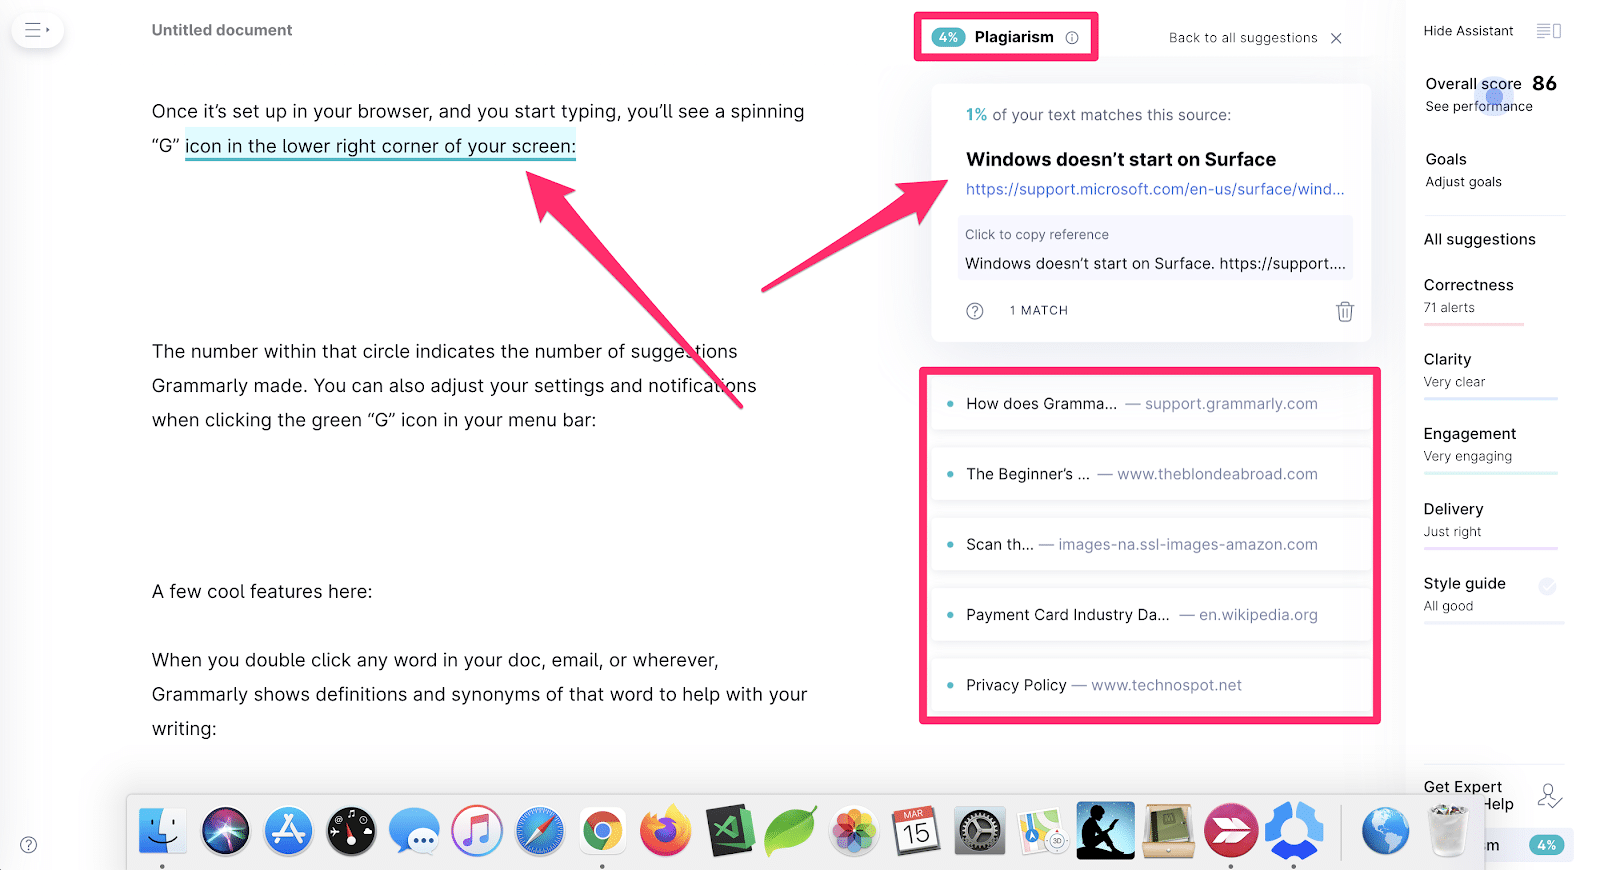 how the plagiarism checker displays in the app for this grammarly review